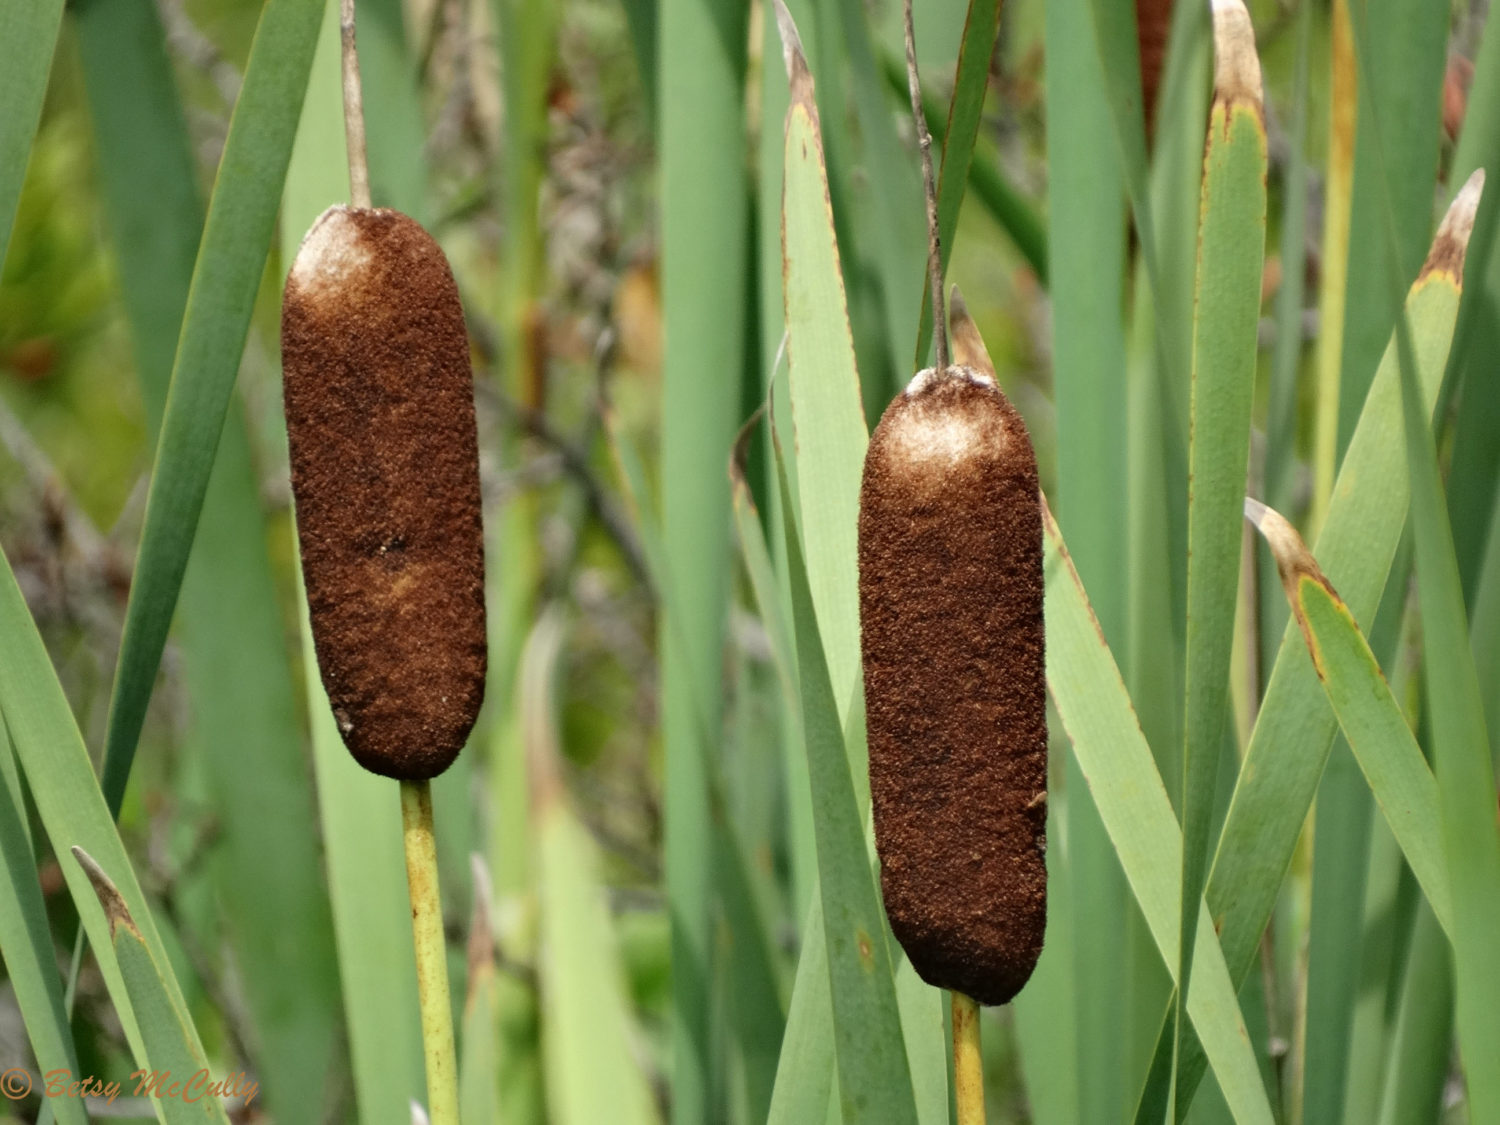 photo of cattails